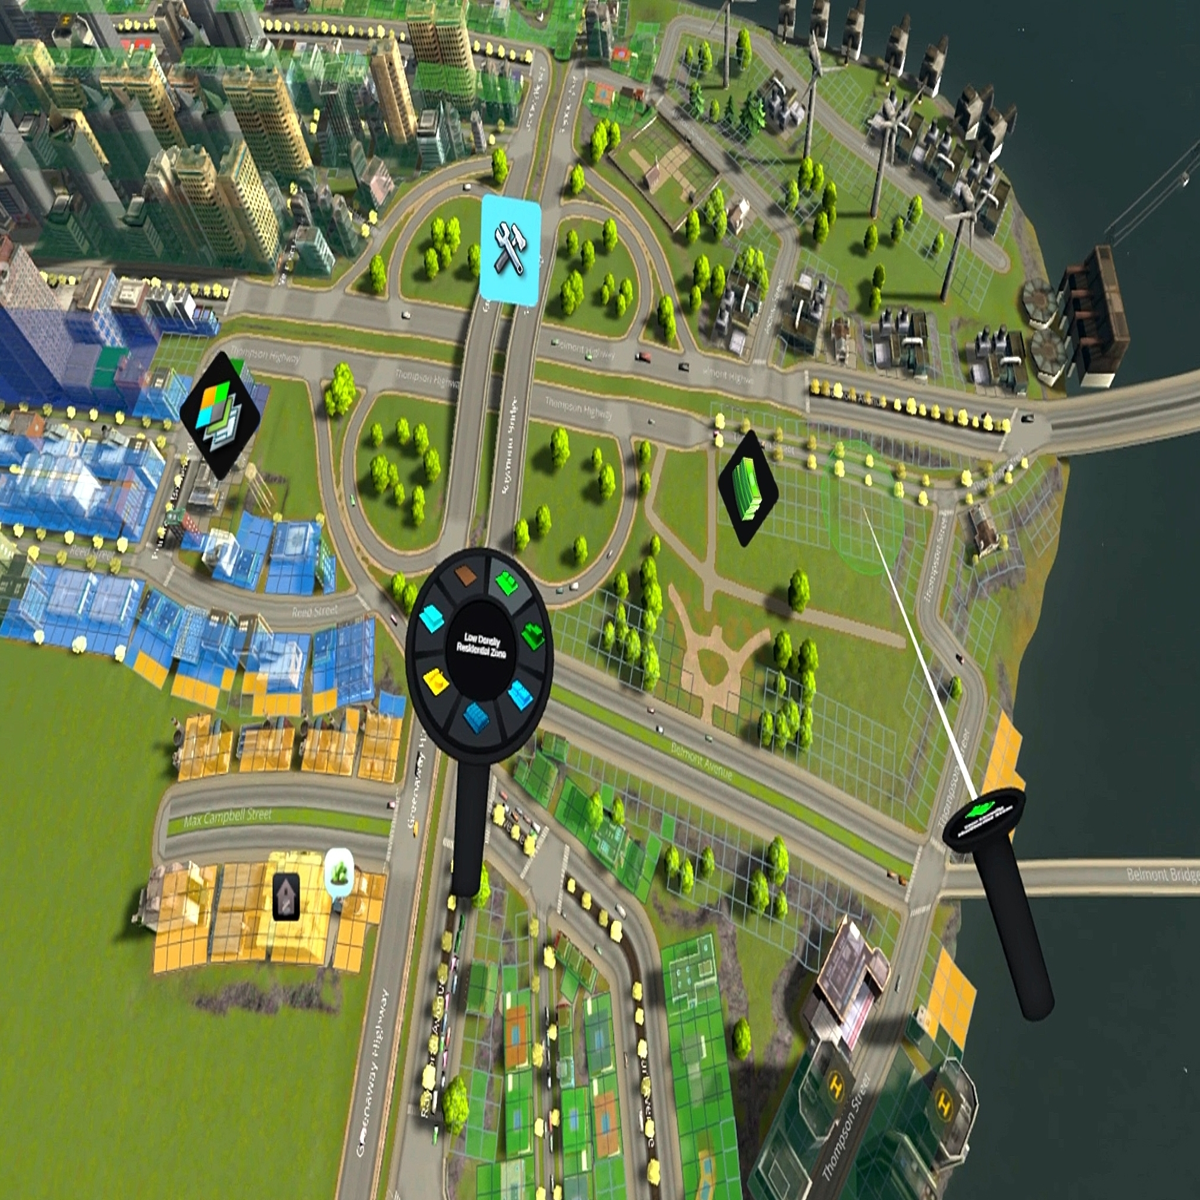 https://assetsio.gnwcdn.com/acclaimed-city-builder-cities-skylines-is-getting-the-virtual-reality-treatment-in-cities-vr-1638486152491.jpg?width=1200&height=1200&fit=crop&quality=100&format=png&enable=upscale&auto=webp